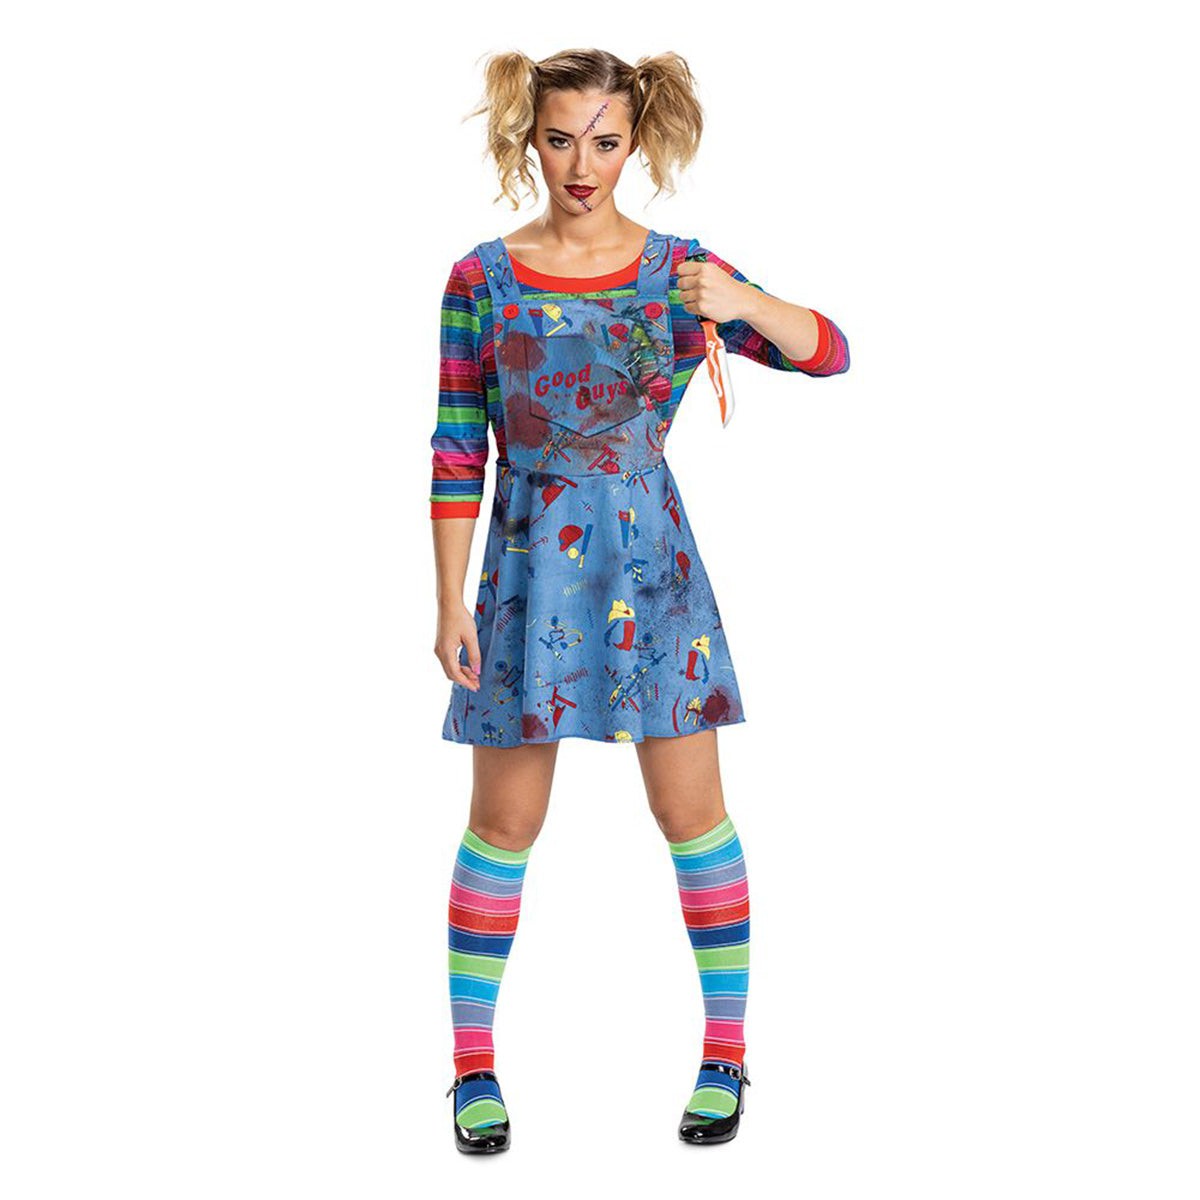 DISGUISE (TOY-SPORT) Costumes Chucky Deluxe Costume for Adults, Dress and Rainbow Socks